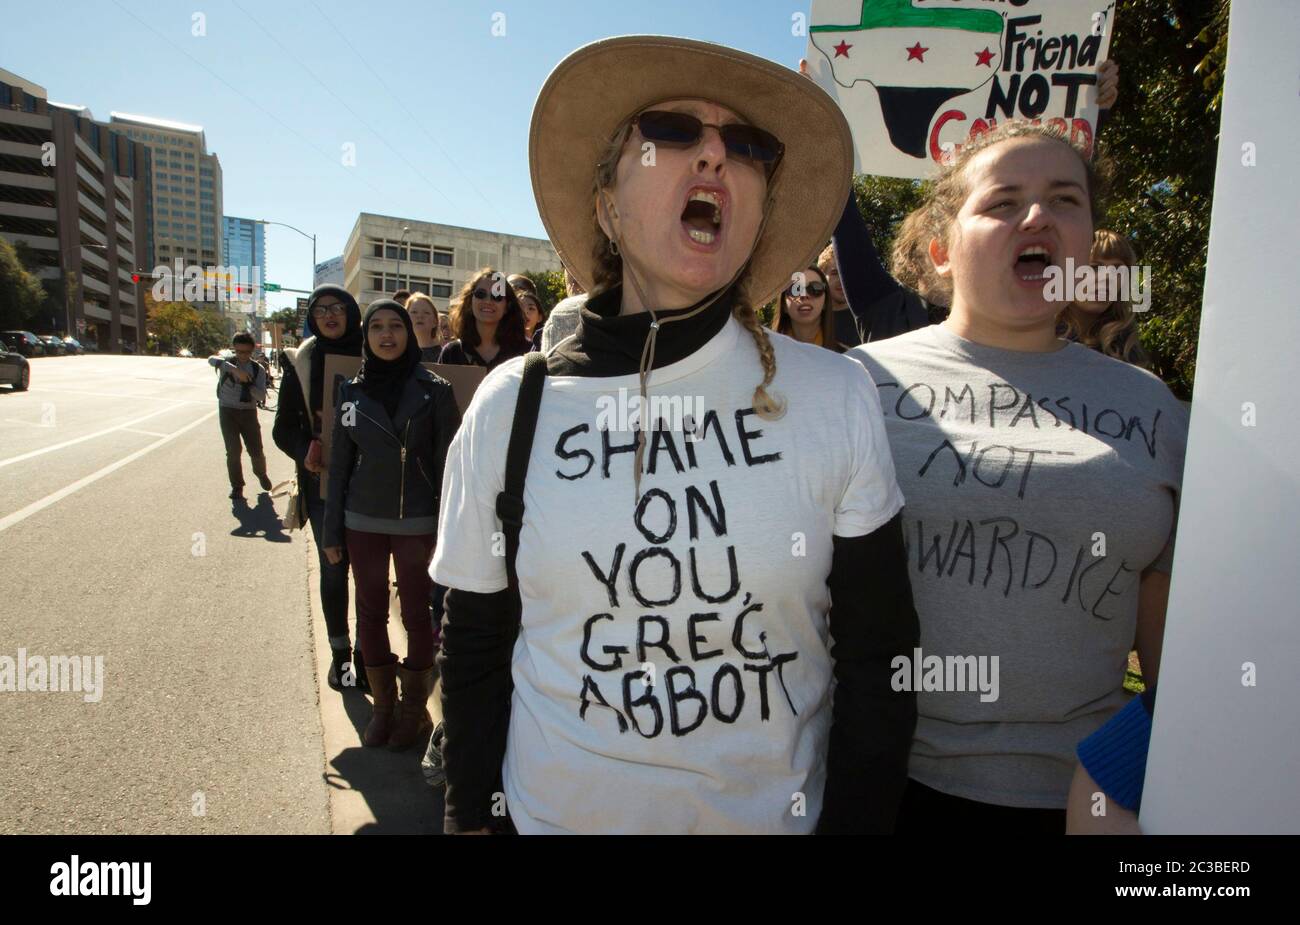 November 22 2015, Austin Texas USA: Group gathers at Wooldridge Park in downtown Austin to protest Governor Greg Abbott's decision not to allow Syrian refugees into the state. The Syrian People Solidarity Group organized the protest, which included several hundred people   © Marjorie Kamys Cotera /Daemmrich Photography Stock Photo